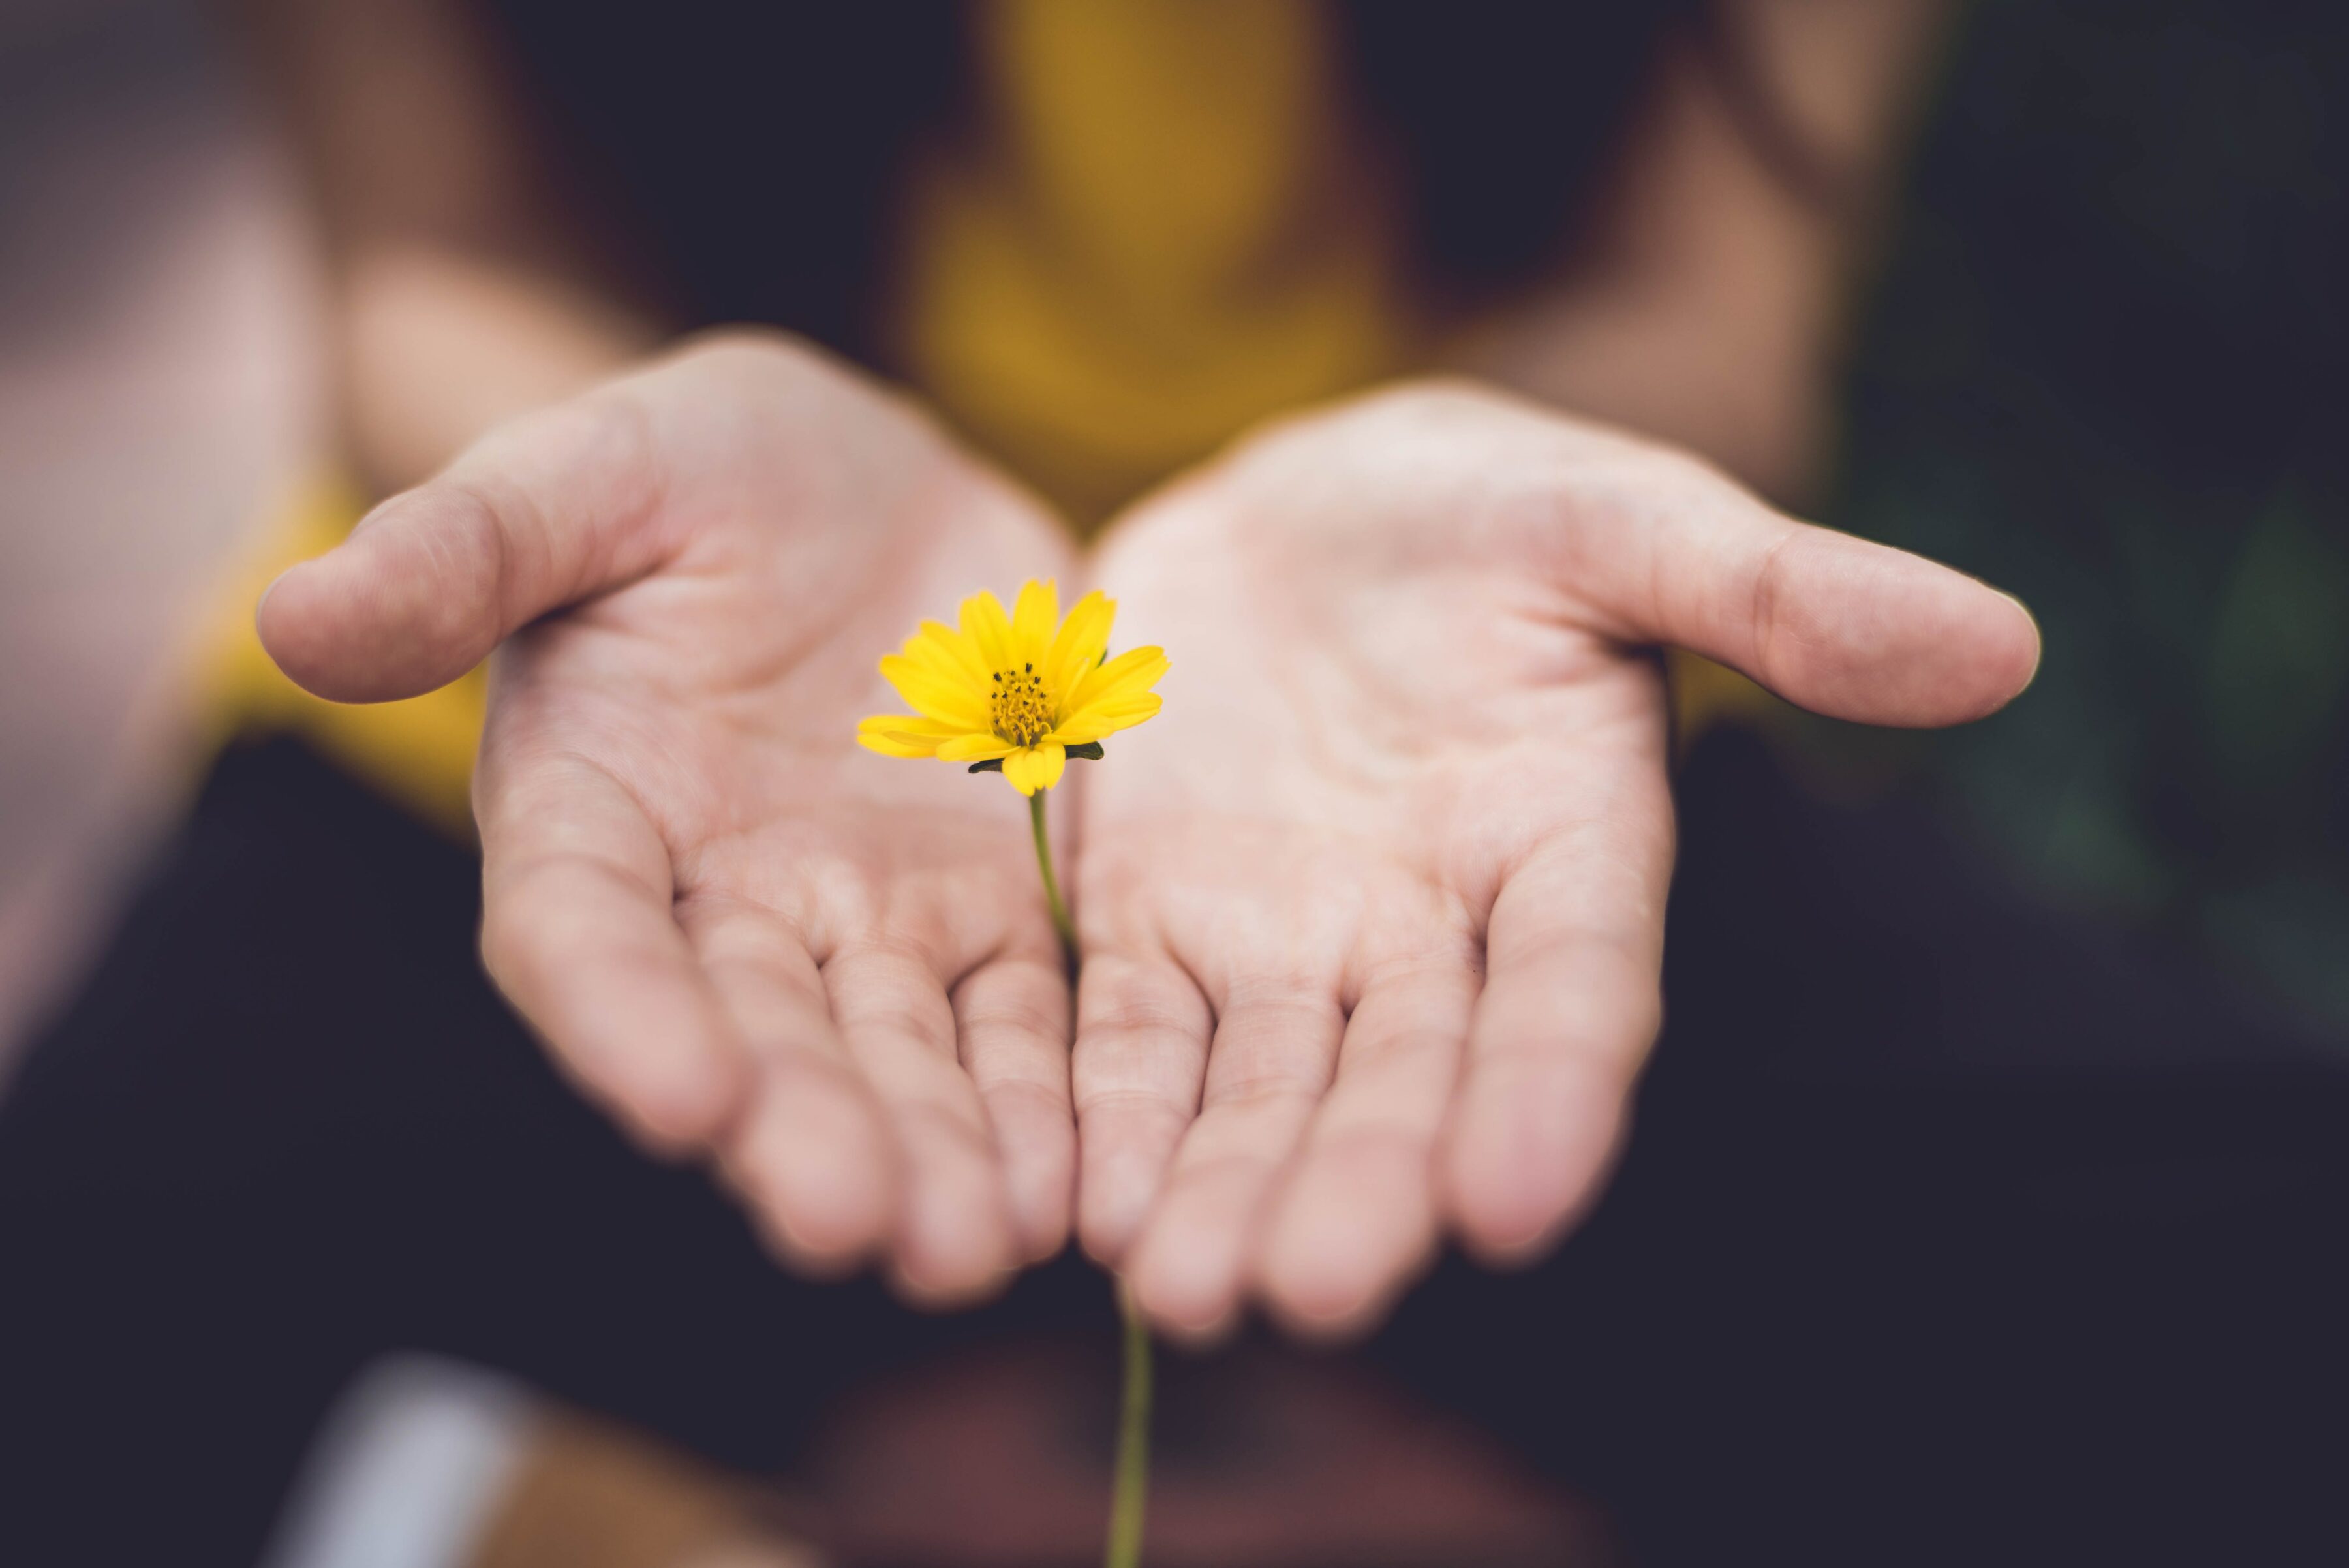 An open palm holding a flower to represent mindfulness.